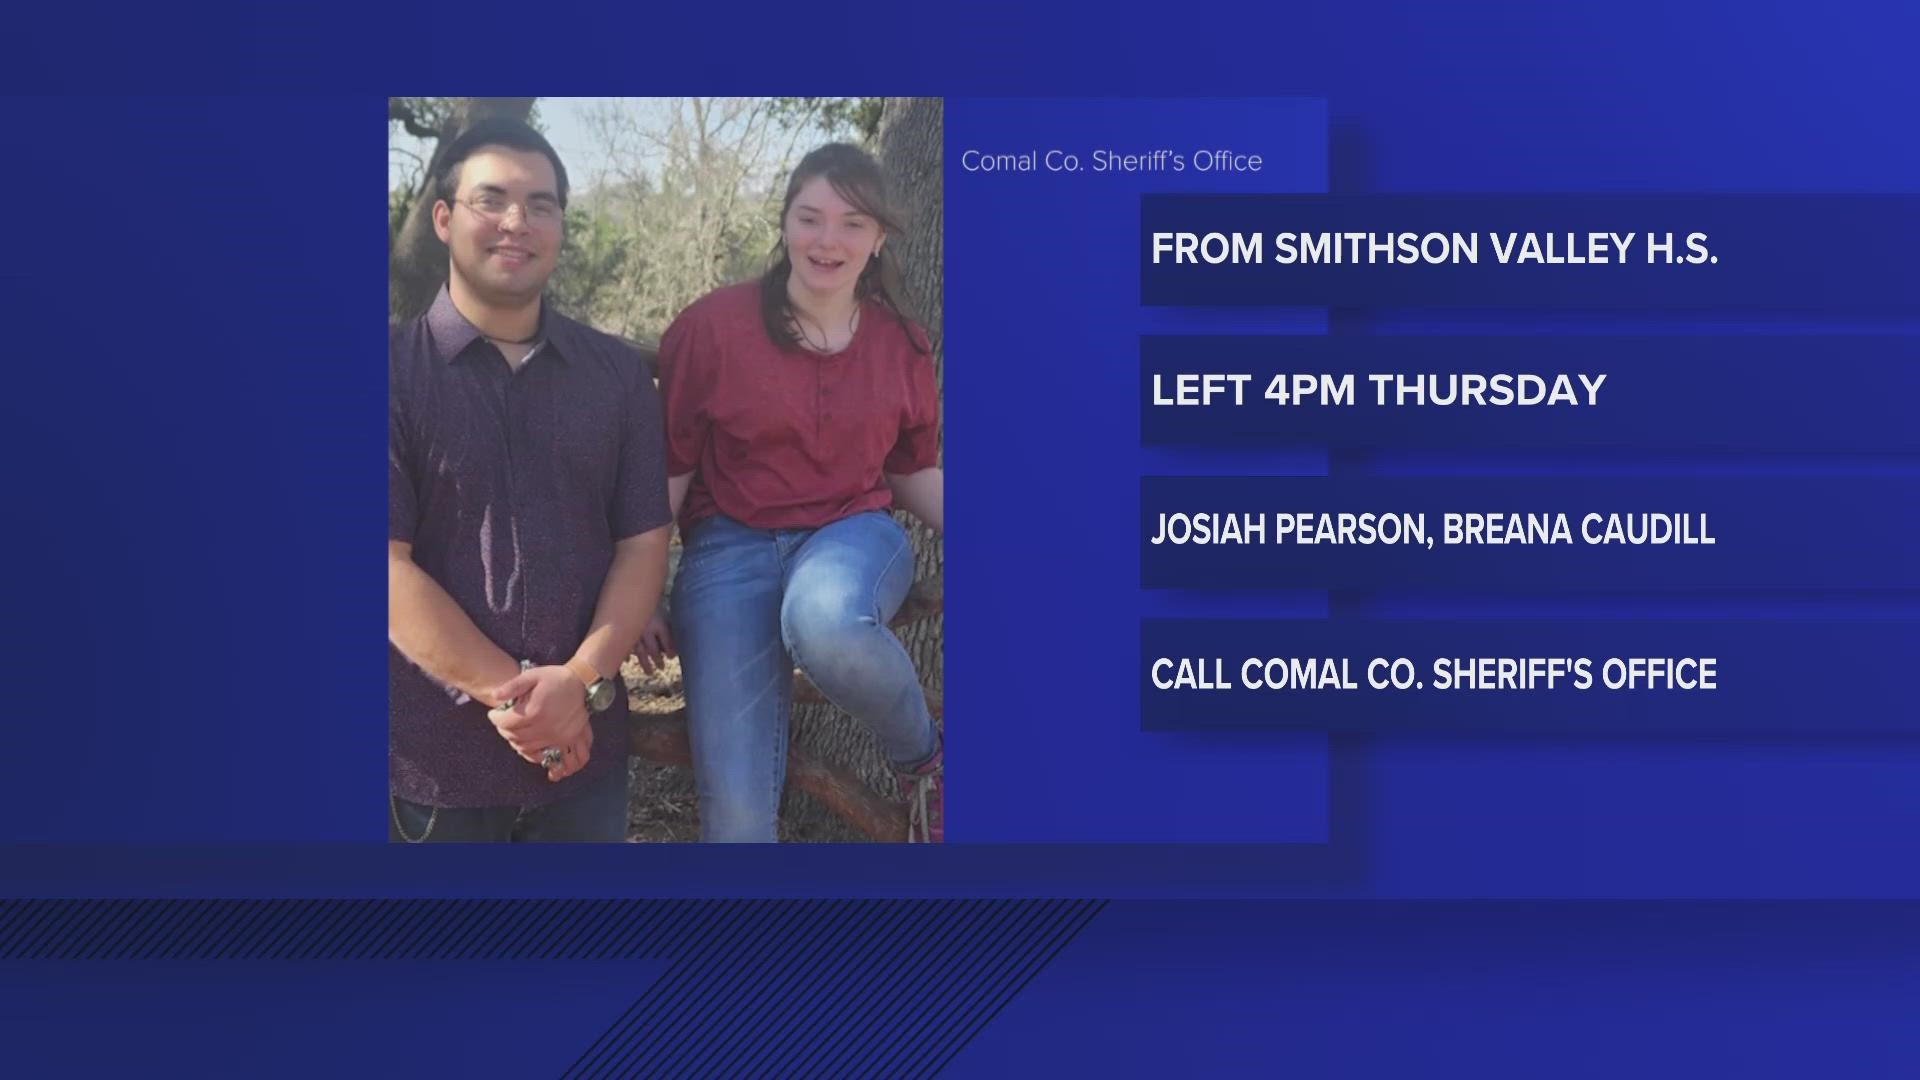 Two teens were last seen leaving Smithson Valley High School on Thursday around 4 p.m.